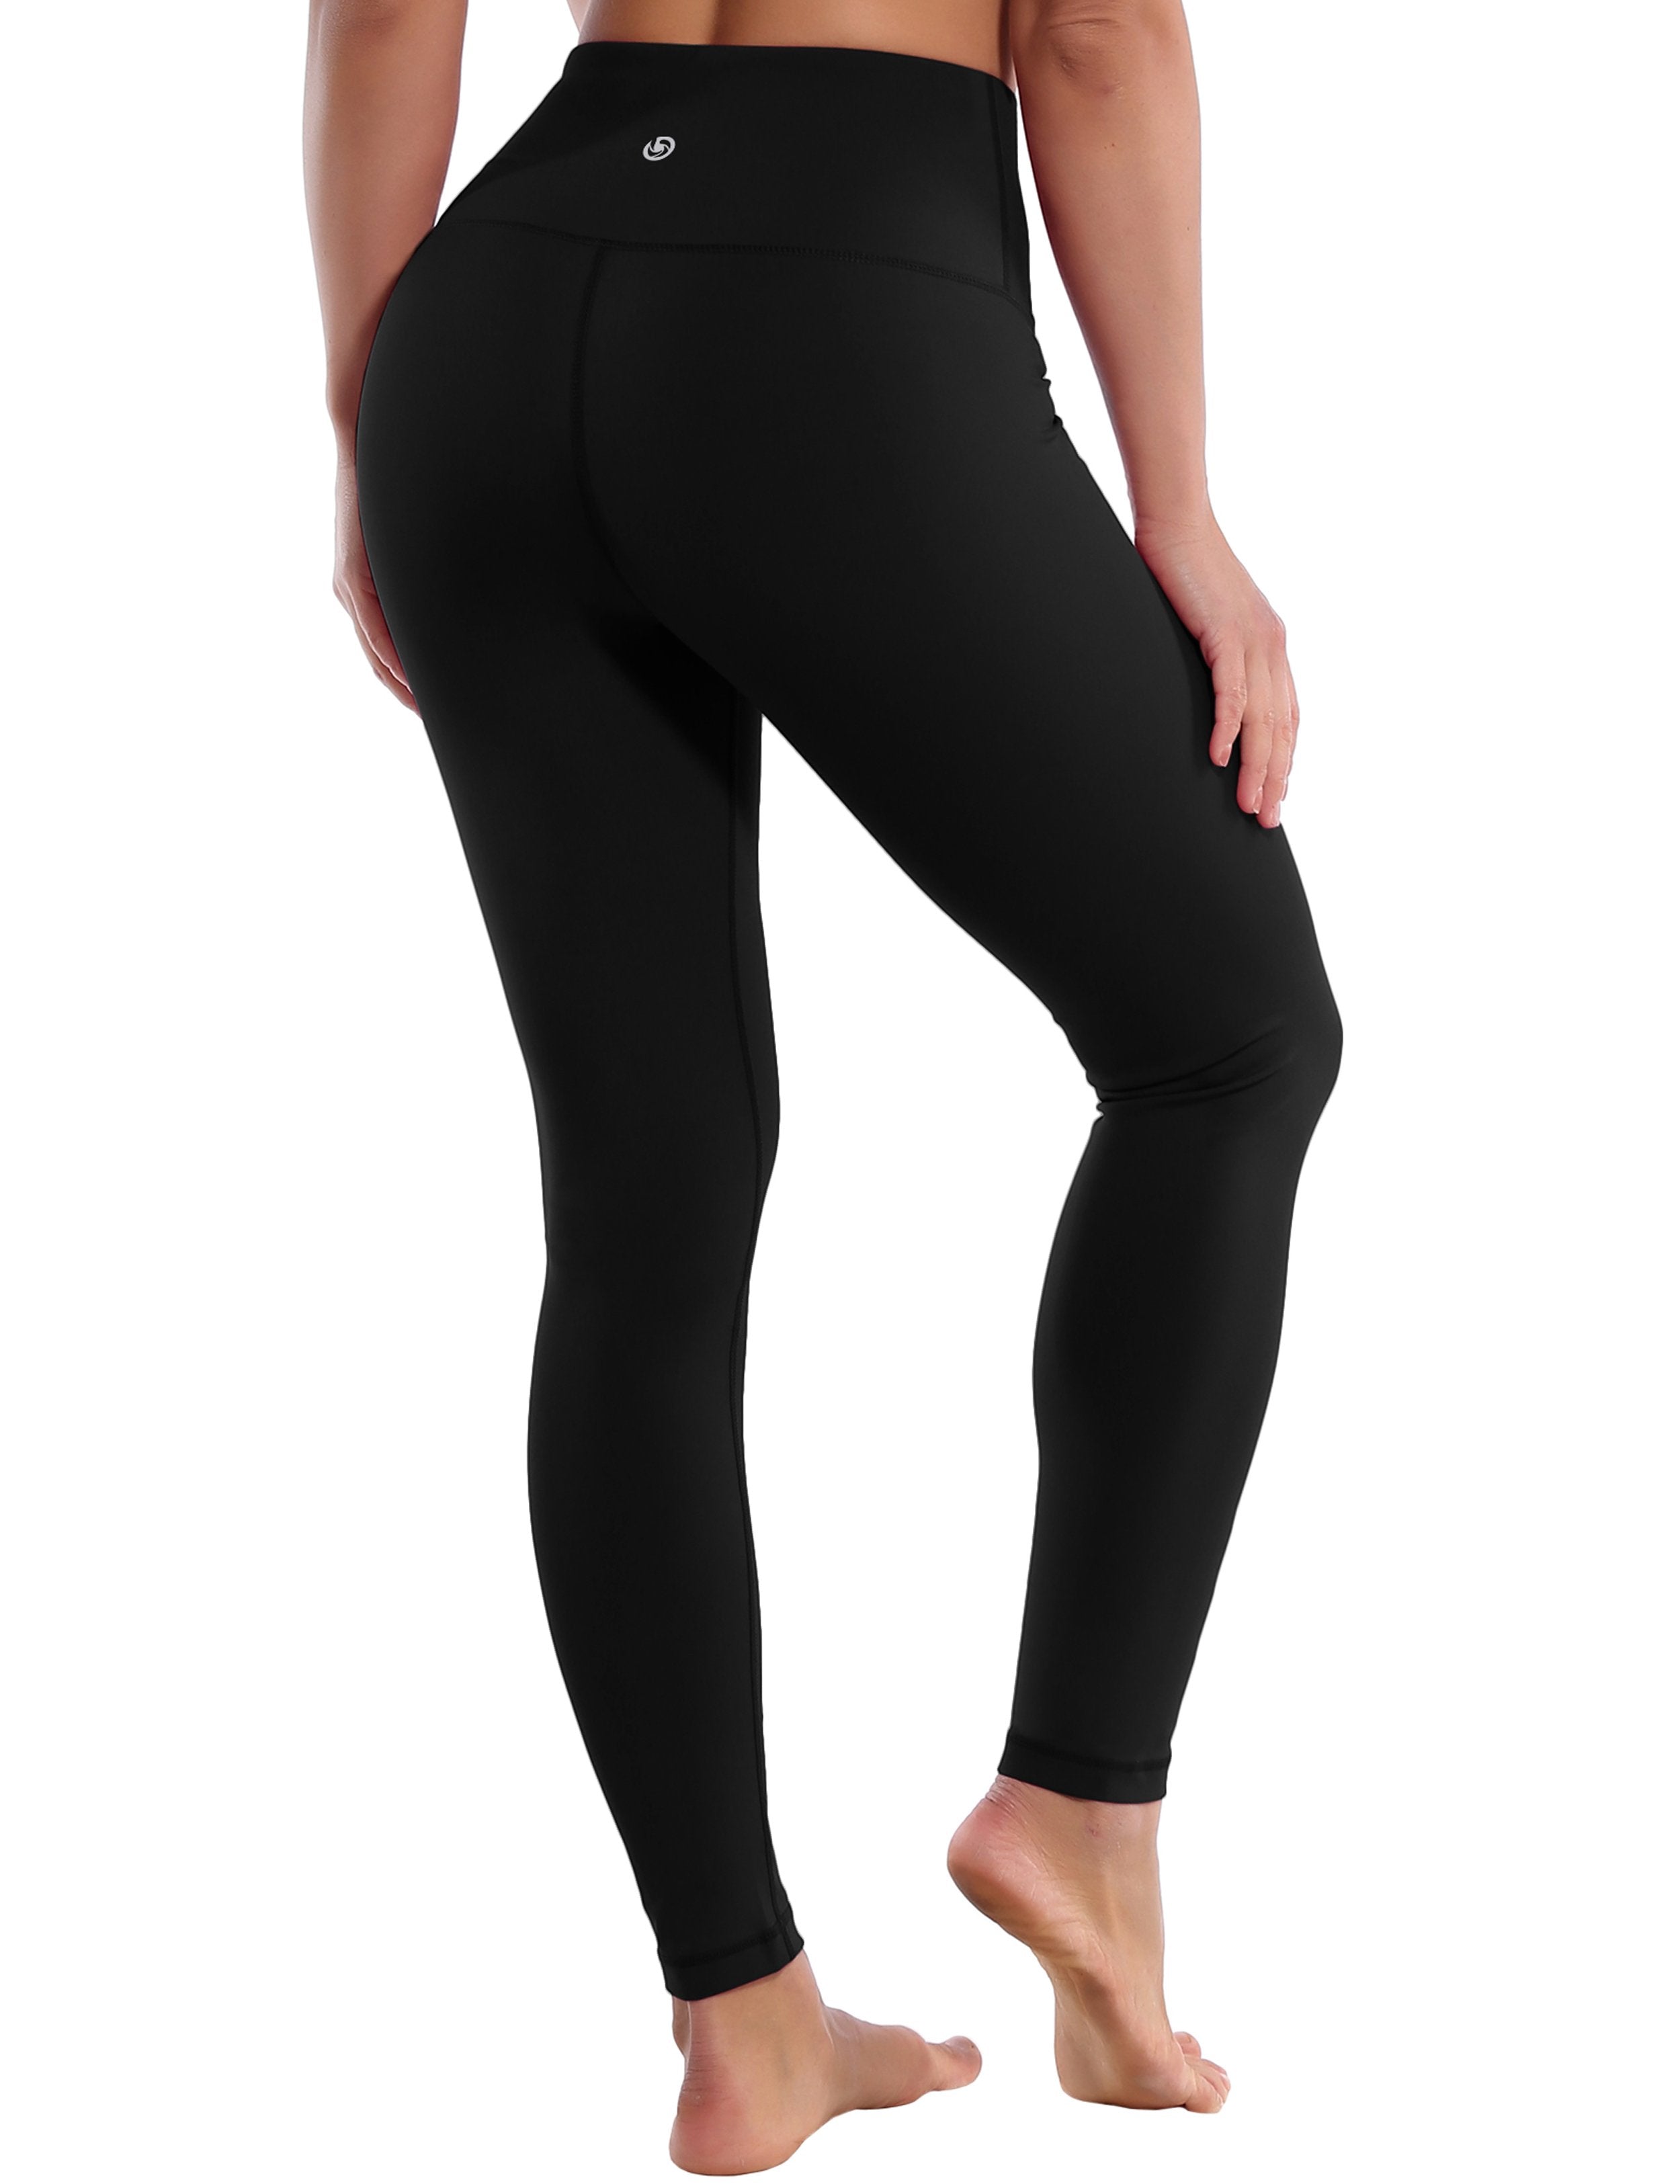 High Waist Running Pants black 75%Nylon/25%Spandex Fabric doesn't attract lint easily 4-way stretch No see-through Moisture-wicking Tummy control Inner pocket Four lengths